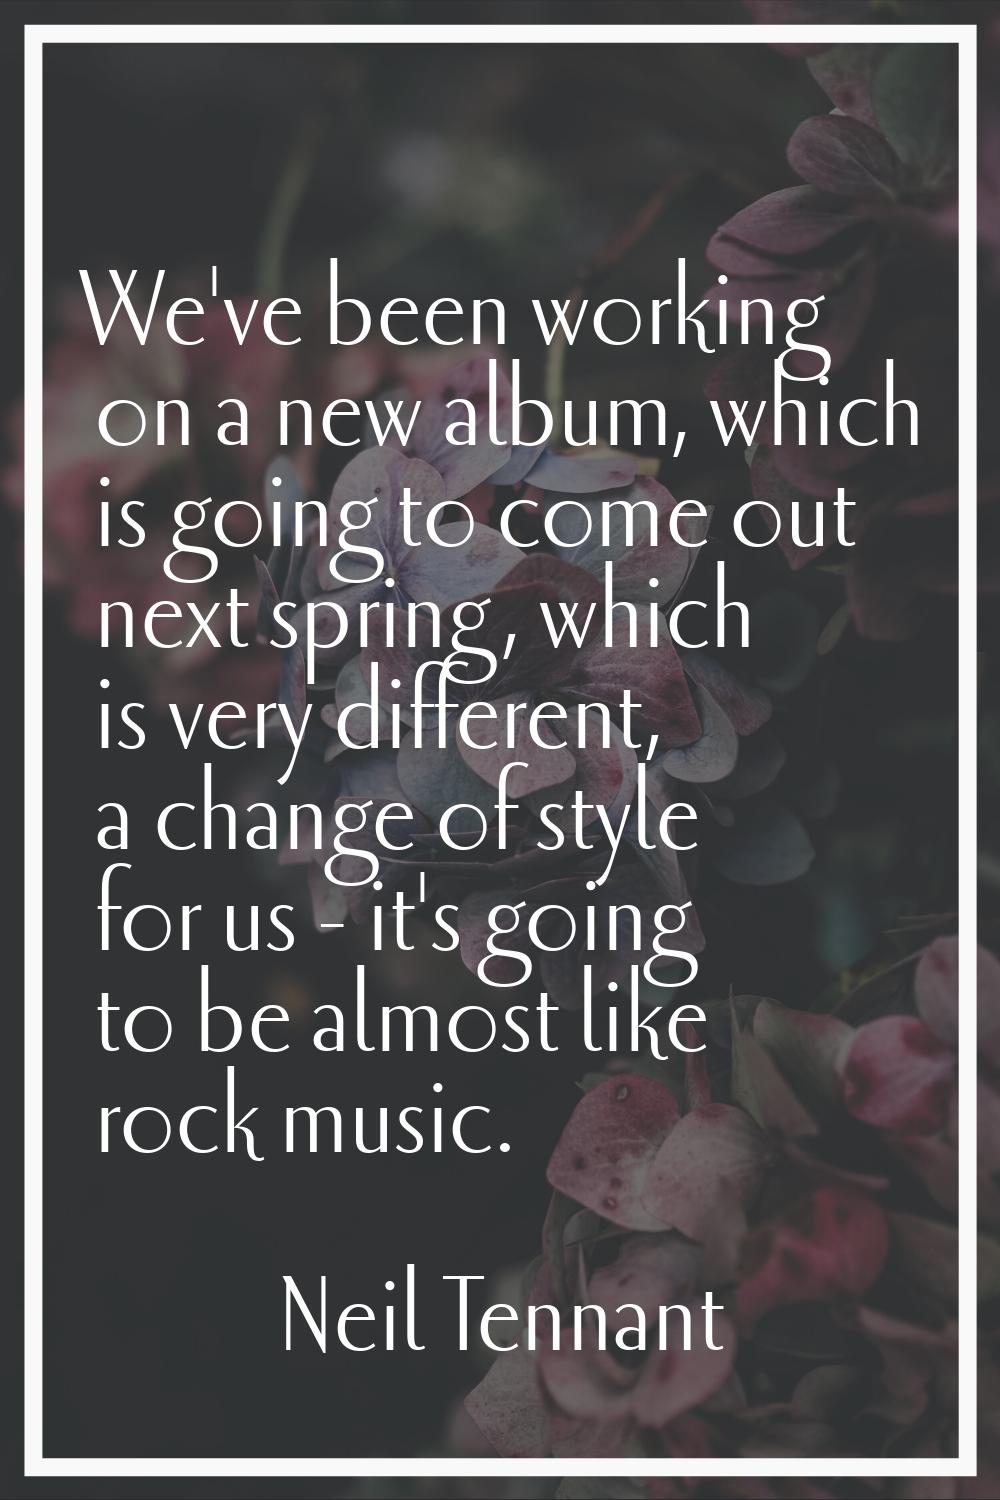 We've been working on a new album, which is going to come out next spring, which is very different,